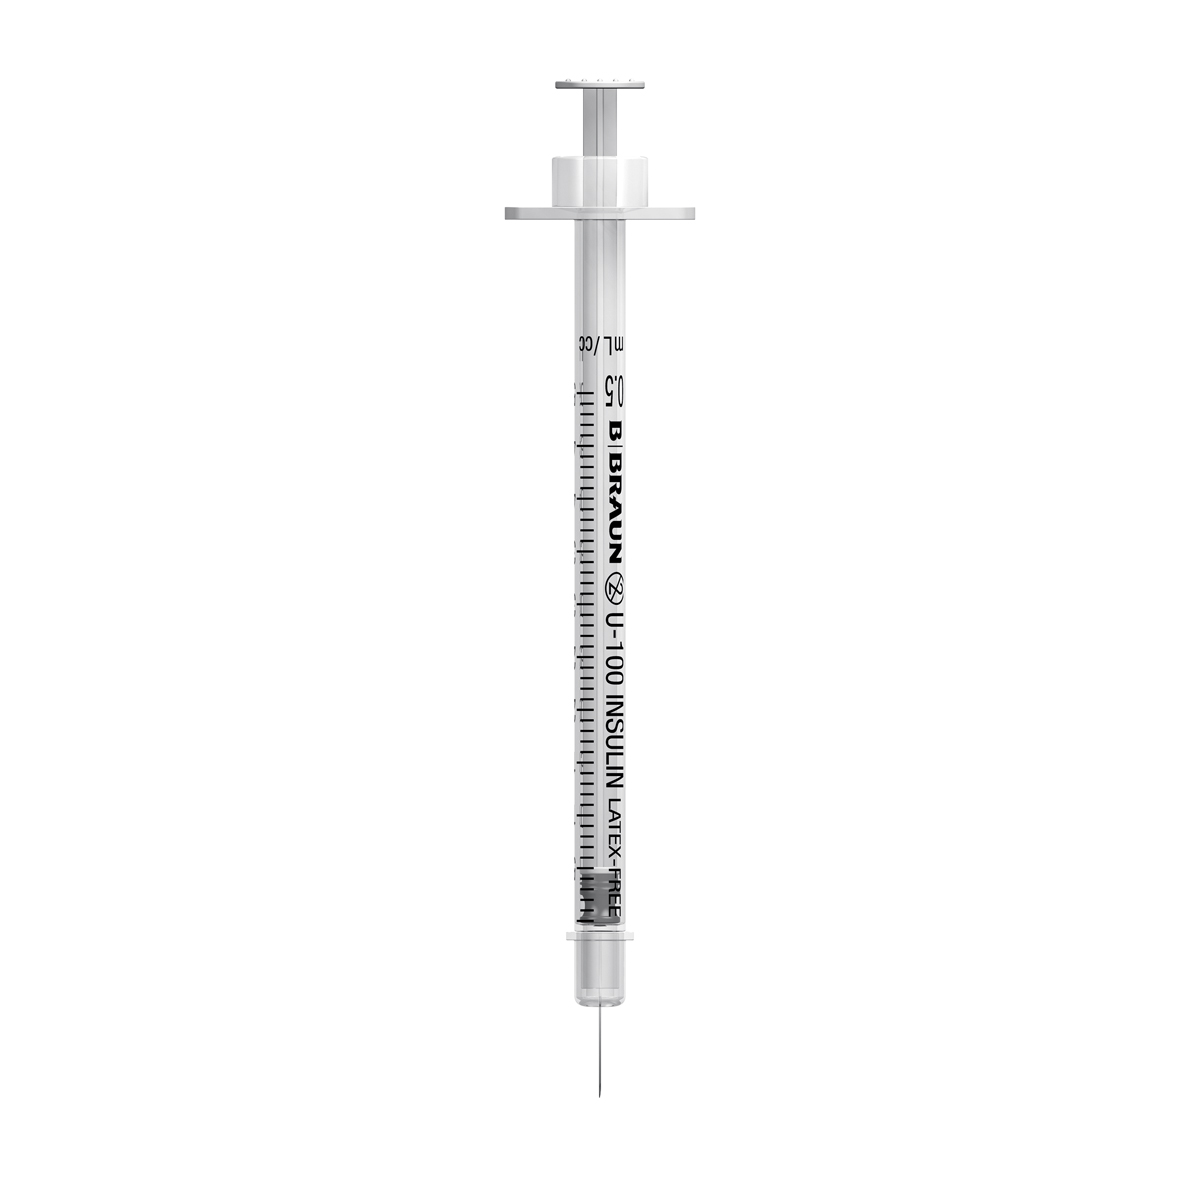 0.5ml 30G 8mm needle BBraun Omnican insulin syringe (temp out of stock)